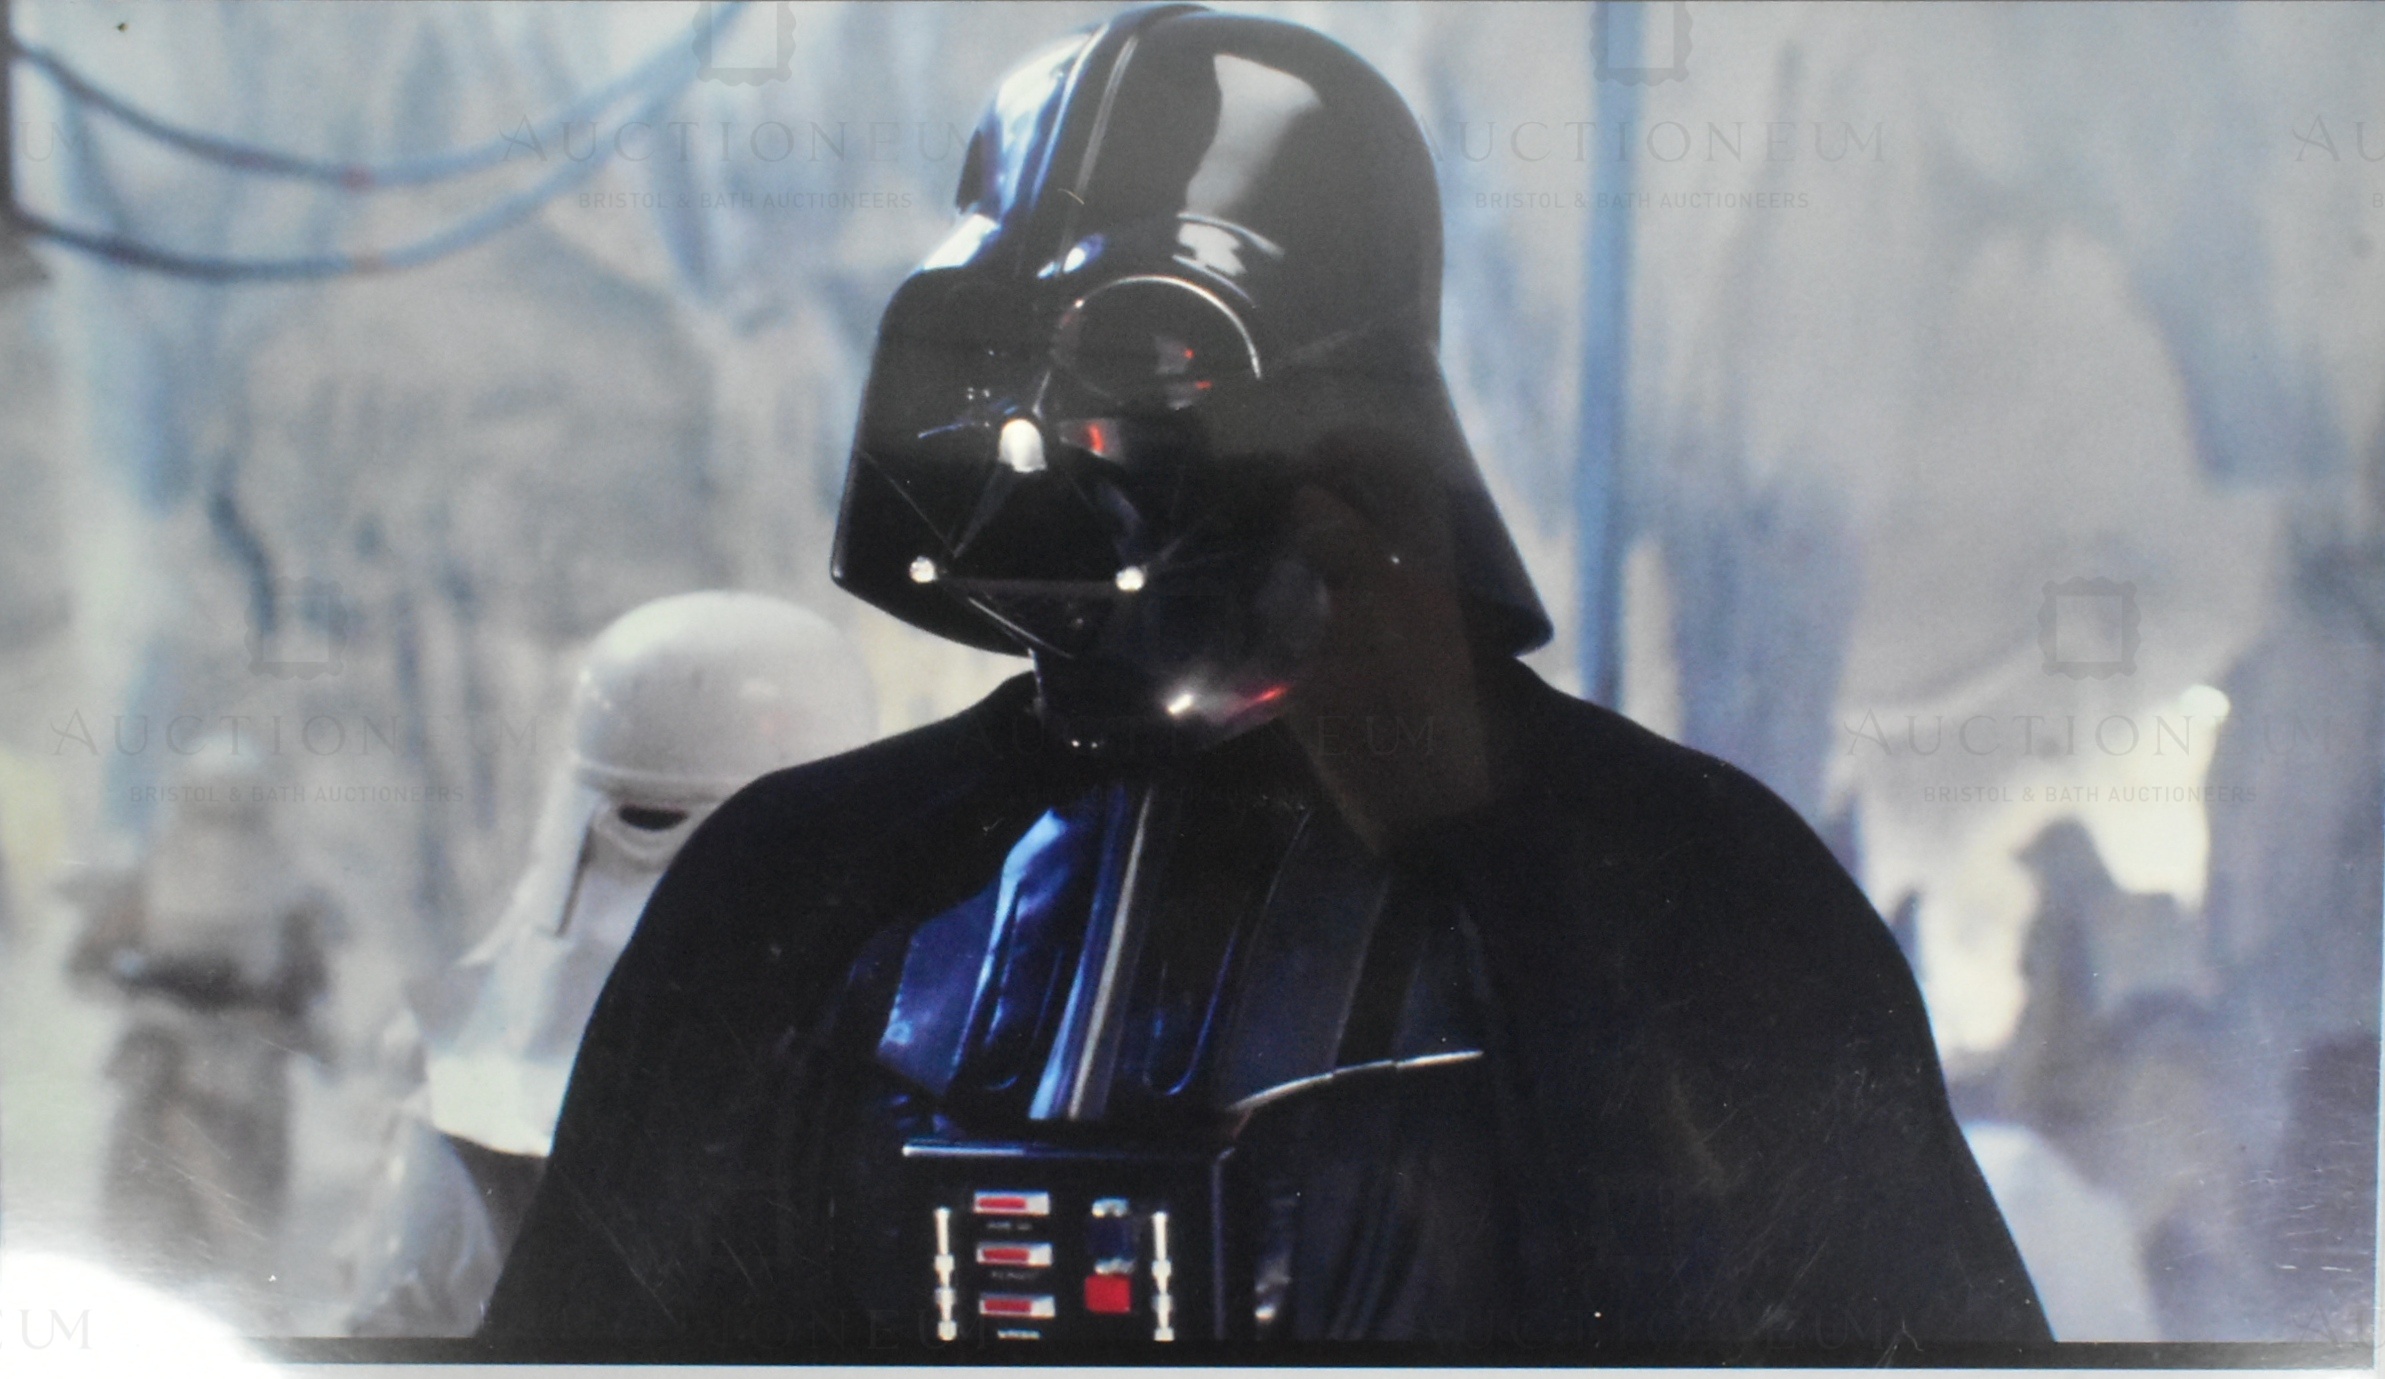 STAR WARS - DAVE PROWSE - DARTH VADER SIGNED 11X14" OFFICIAL PIX - Image 2 of 3